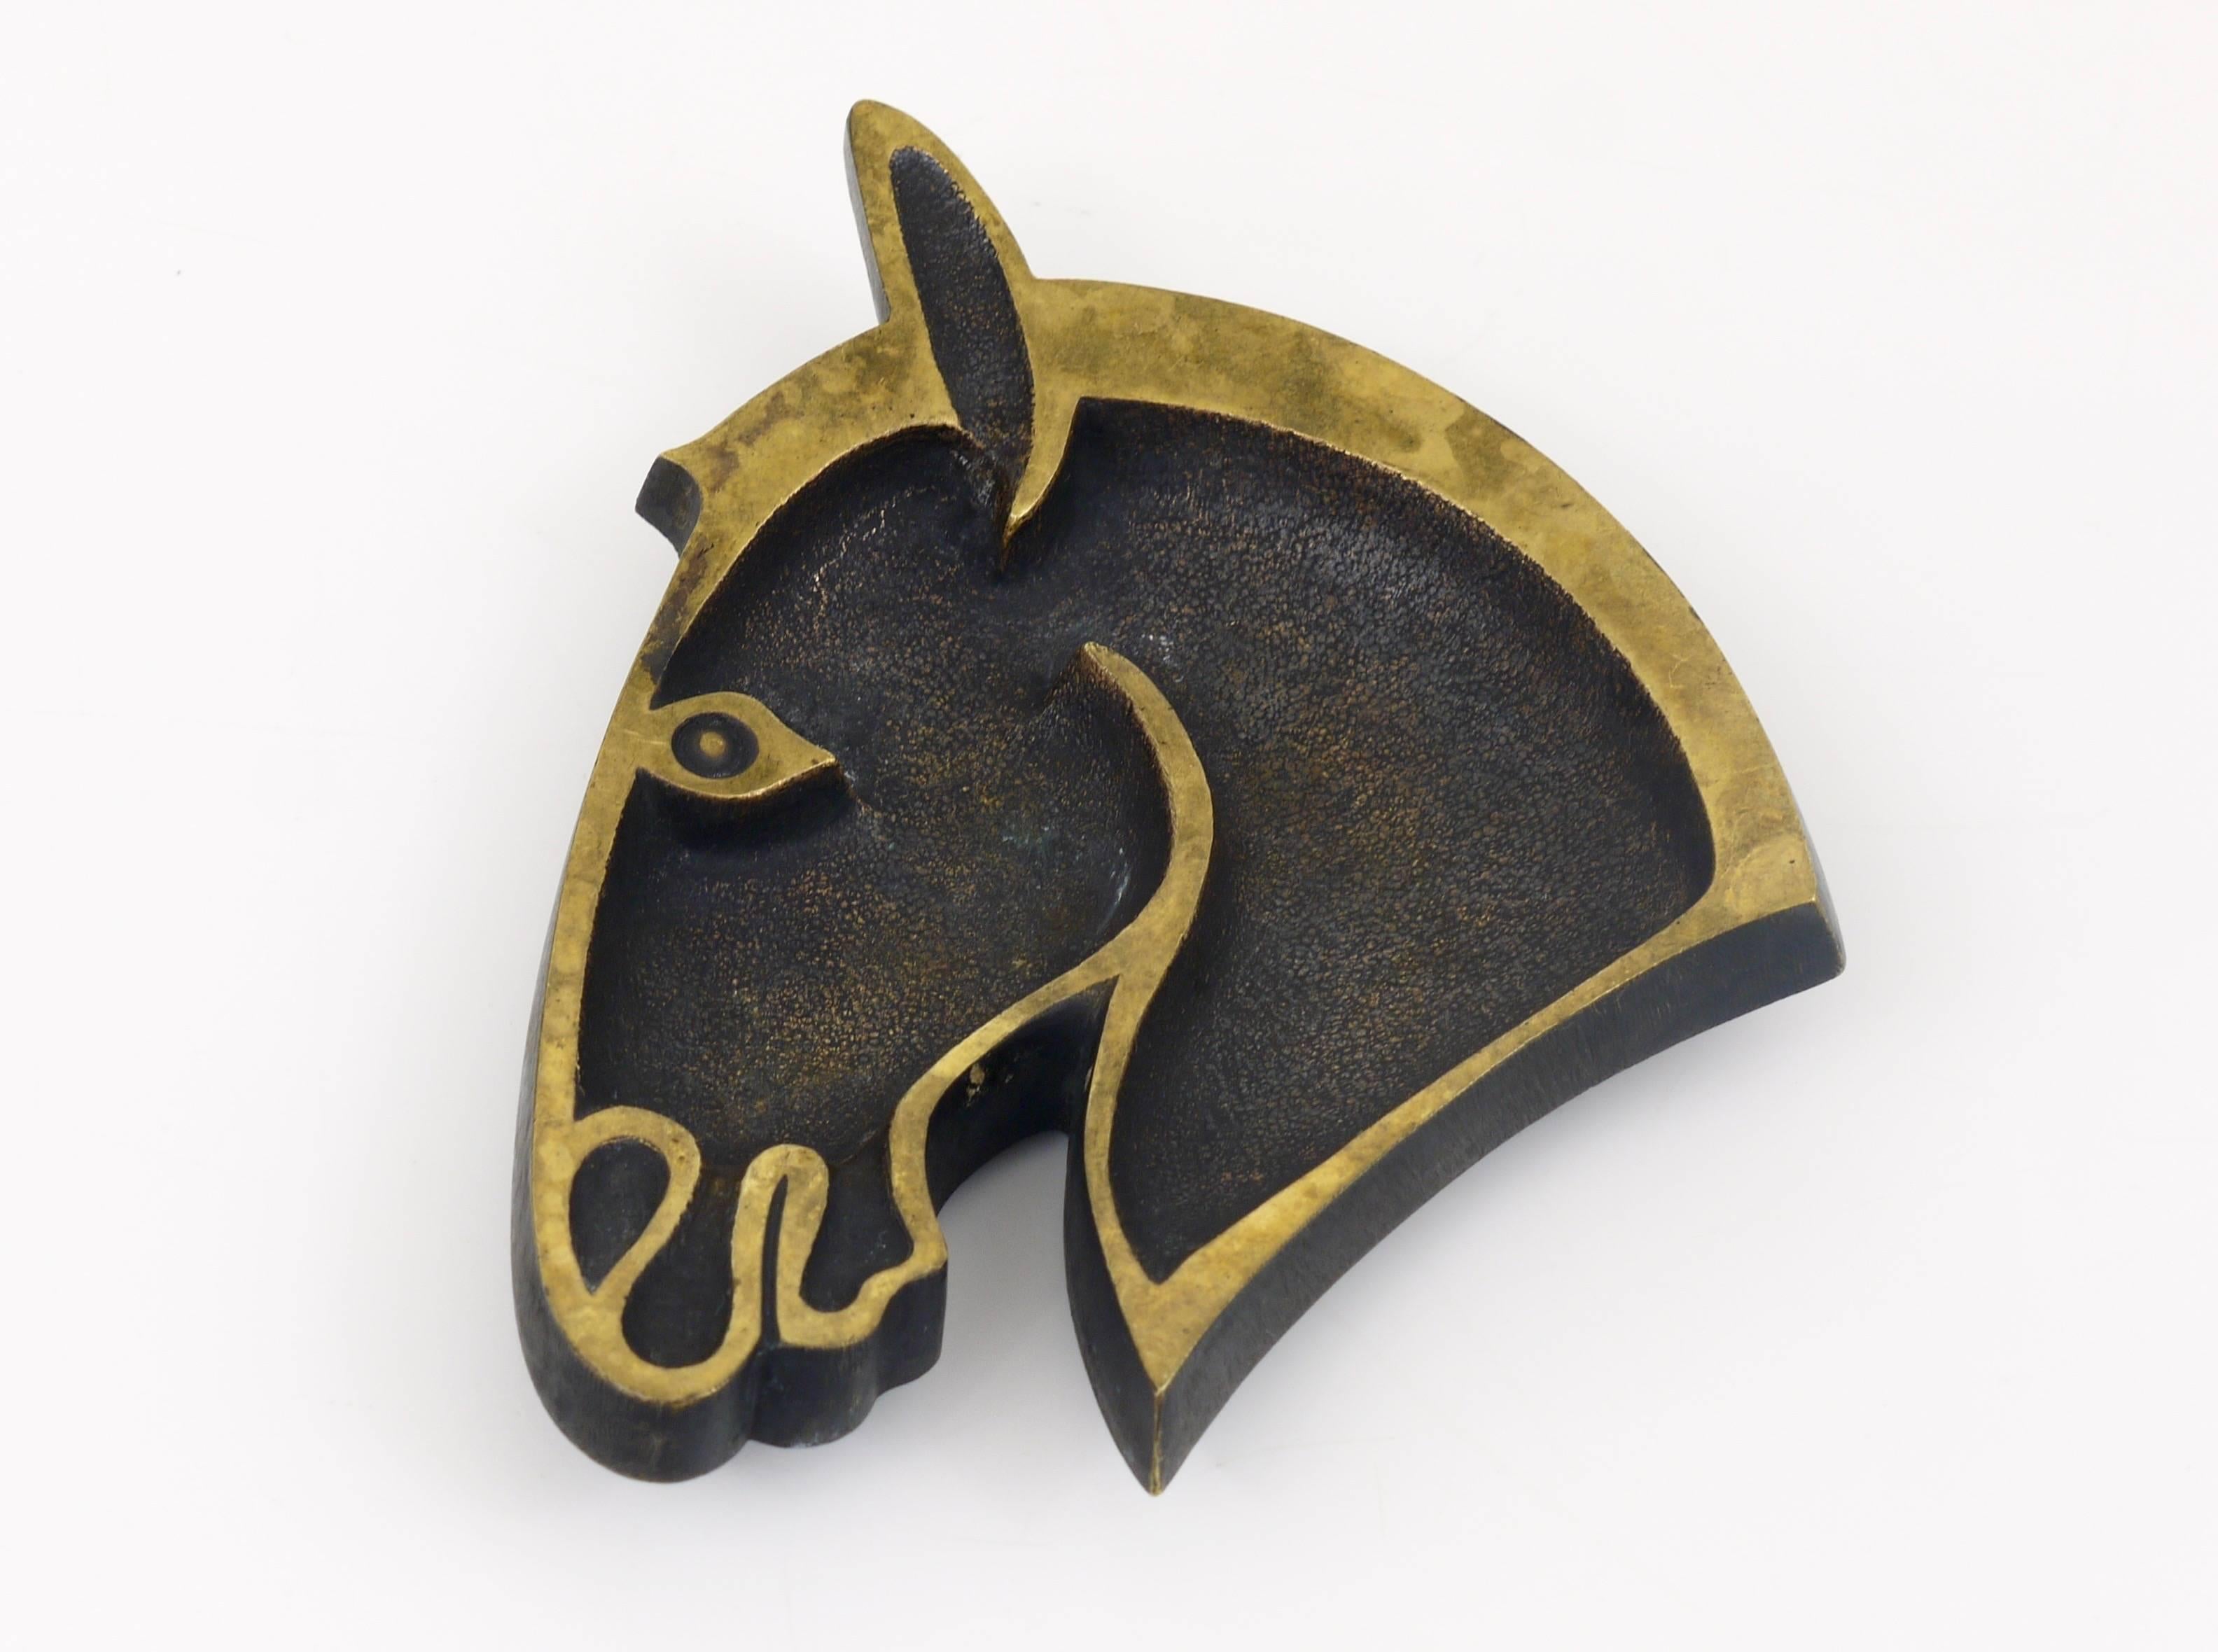 A large modernist ashtray, displaying the head of a horse from the 1950s. Designed by Walter Bosse, executed by Hertha Baller in Austria. Made of brass. An attention-grabbing and solid piece in good condition with nice patina. We offer more Walter